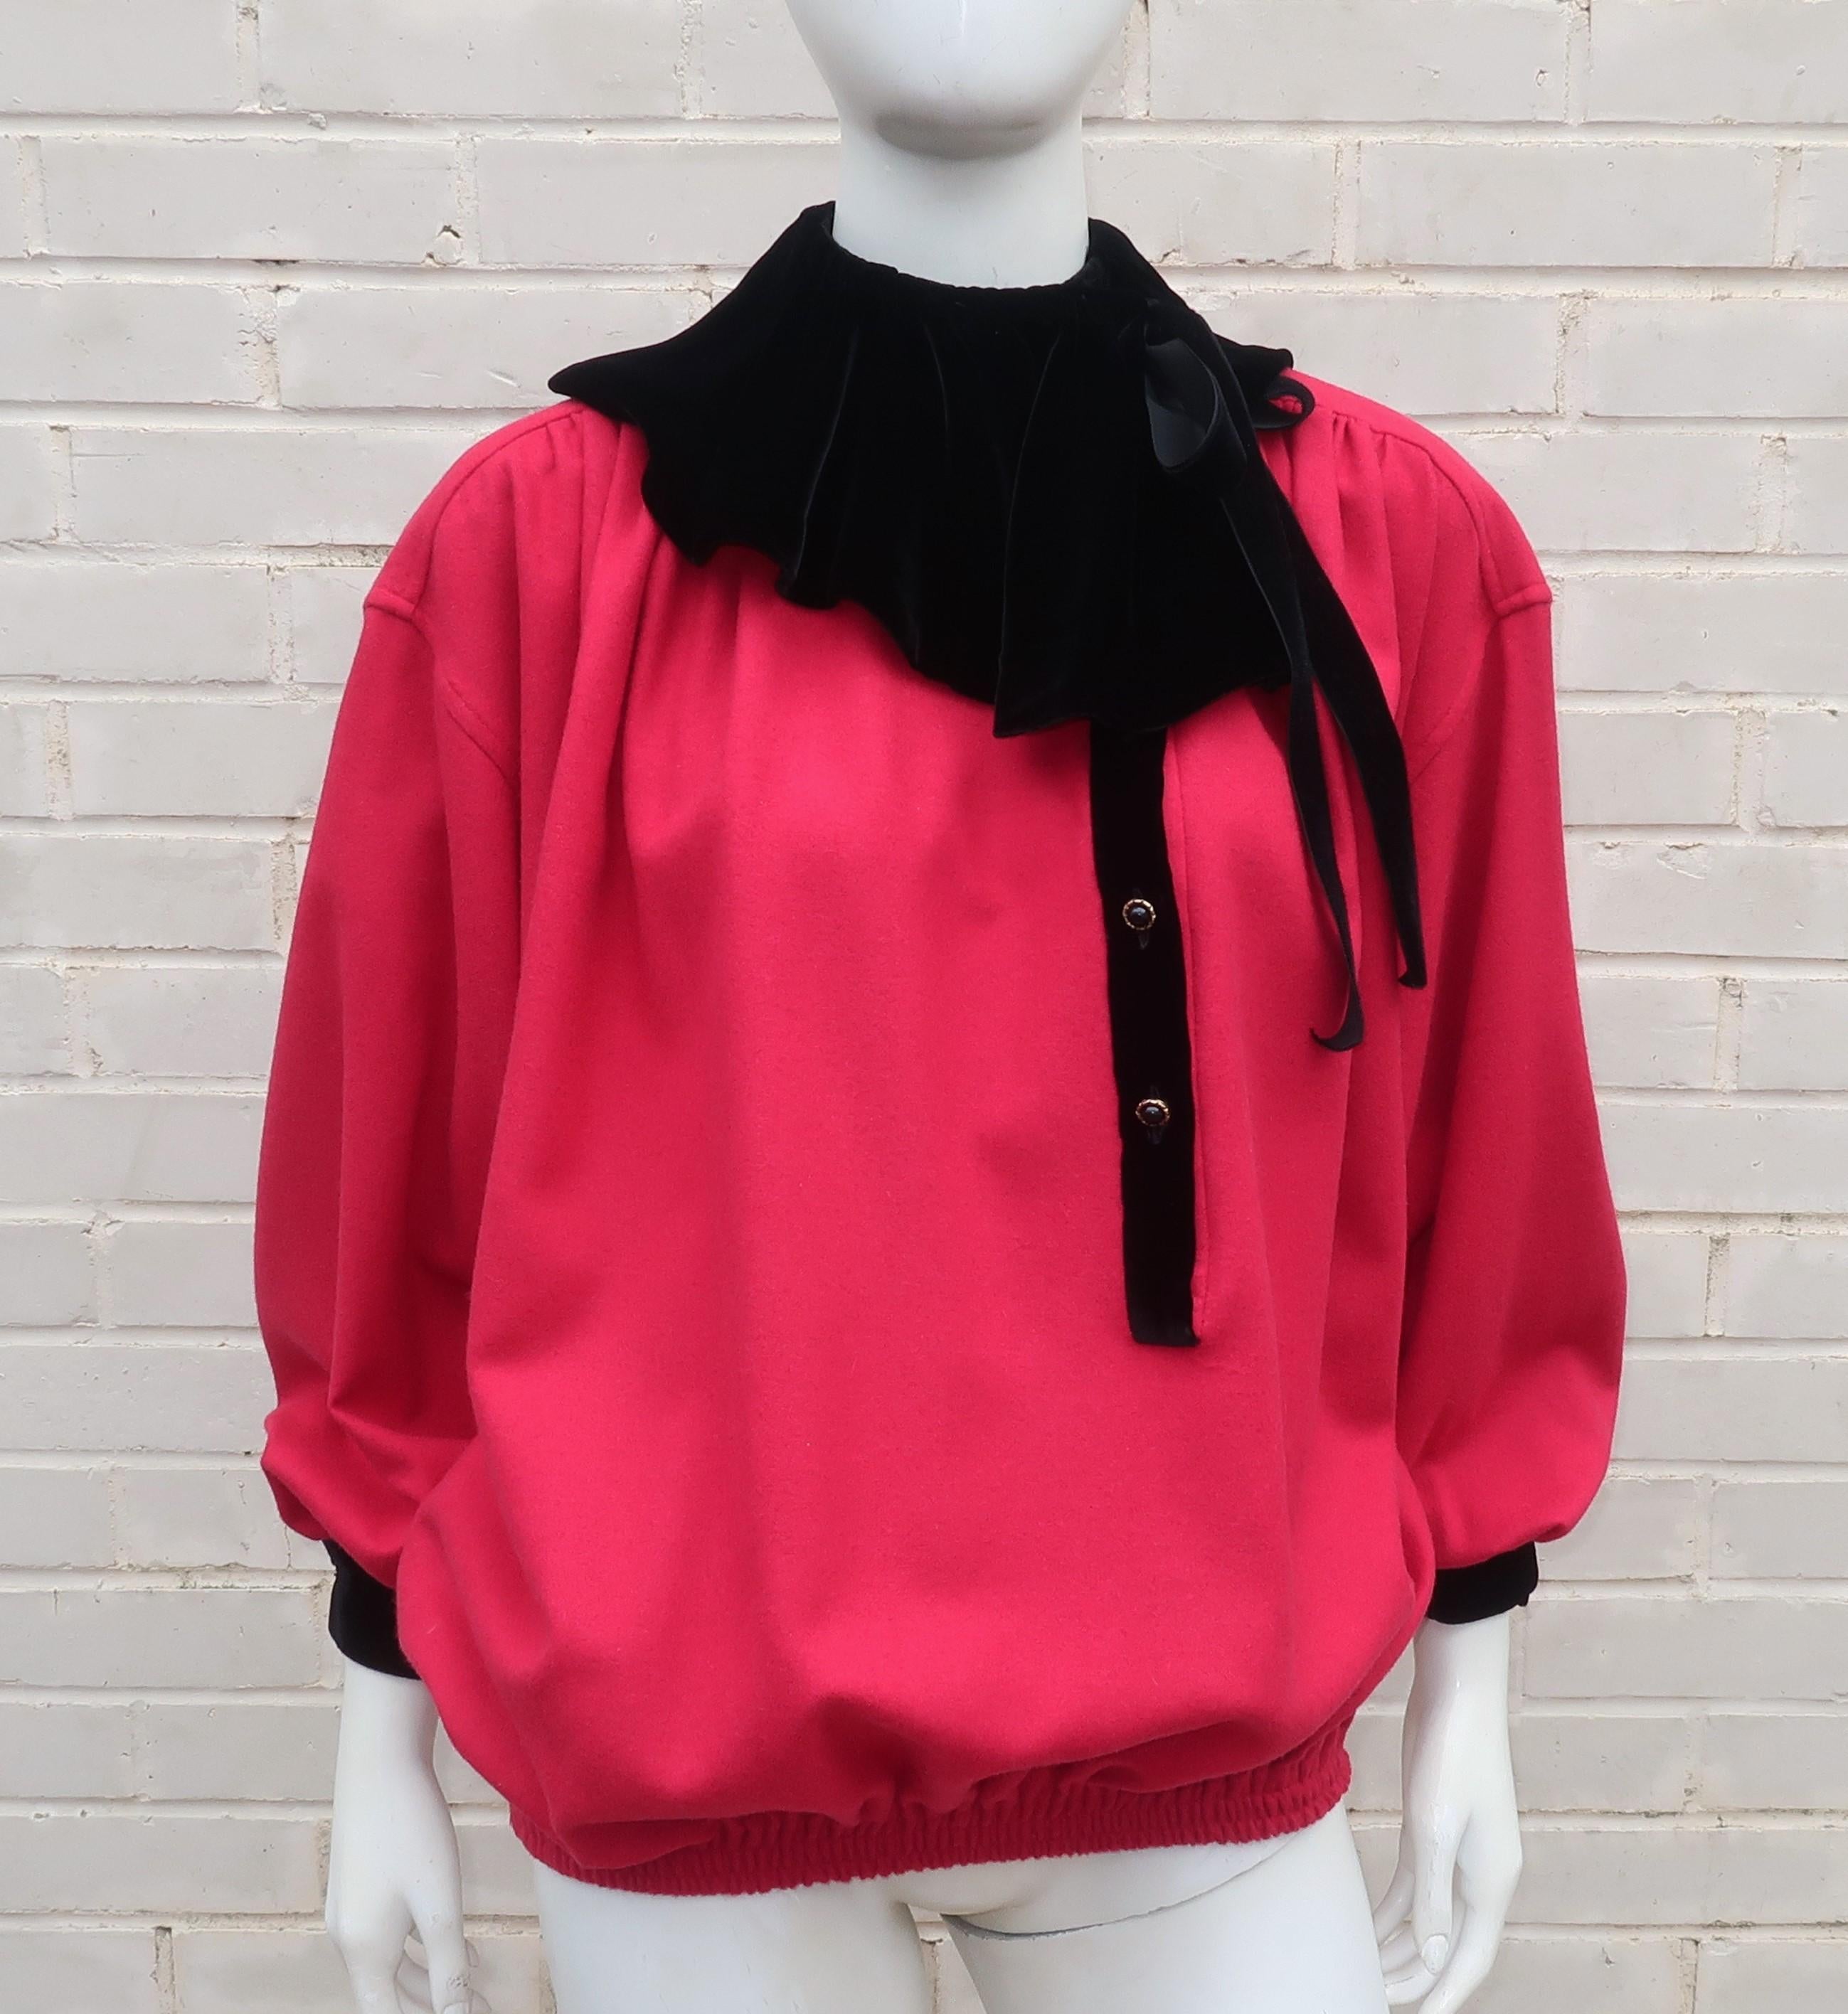 An adorable Emanuel Ungaro red wool pullover top with black velvet ruffled collar, necktie and cuffs.  It partially buttons down the front with hidden side pockets and has an elasticized waistband that helps create a full silhouette akin to a